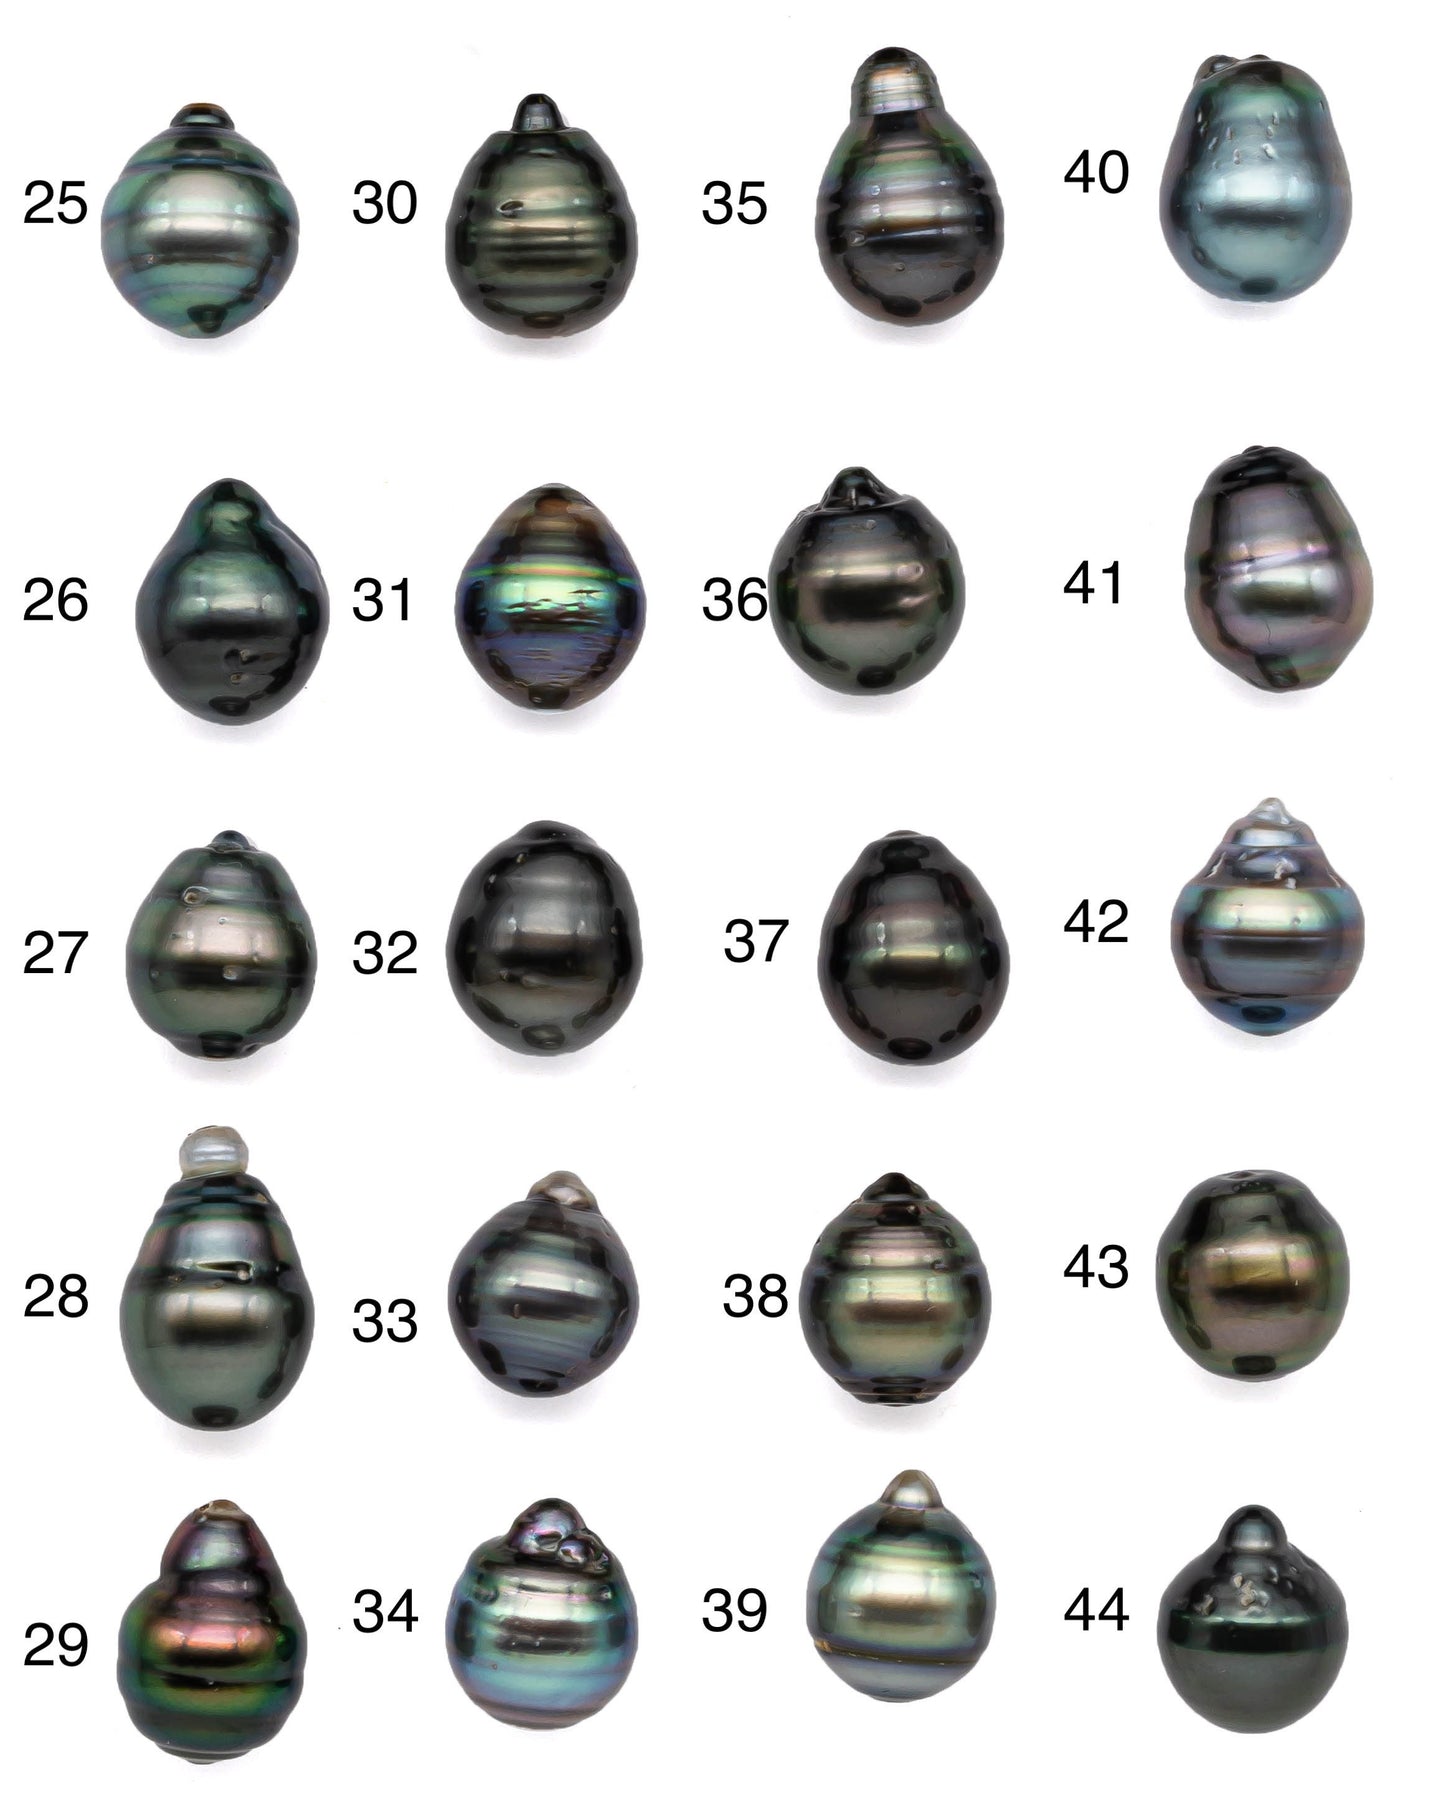 Single Black Tahitian Pearl Drops in Natural Color with High Luster and Blemishes, One Piece Undrilled Pearls, SKU# 1076TH